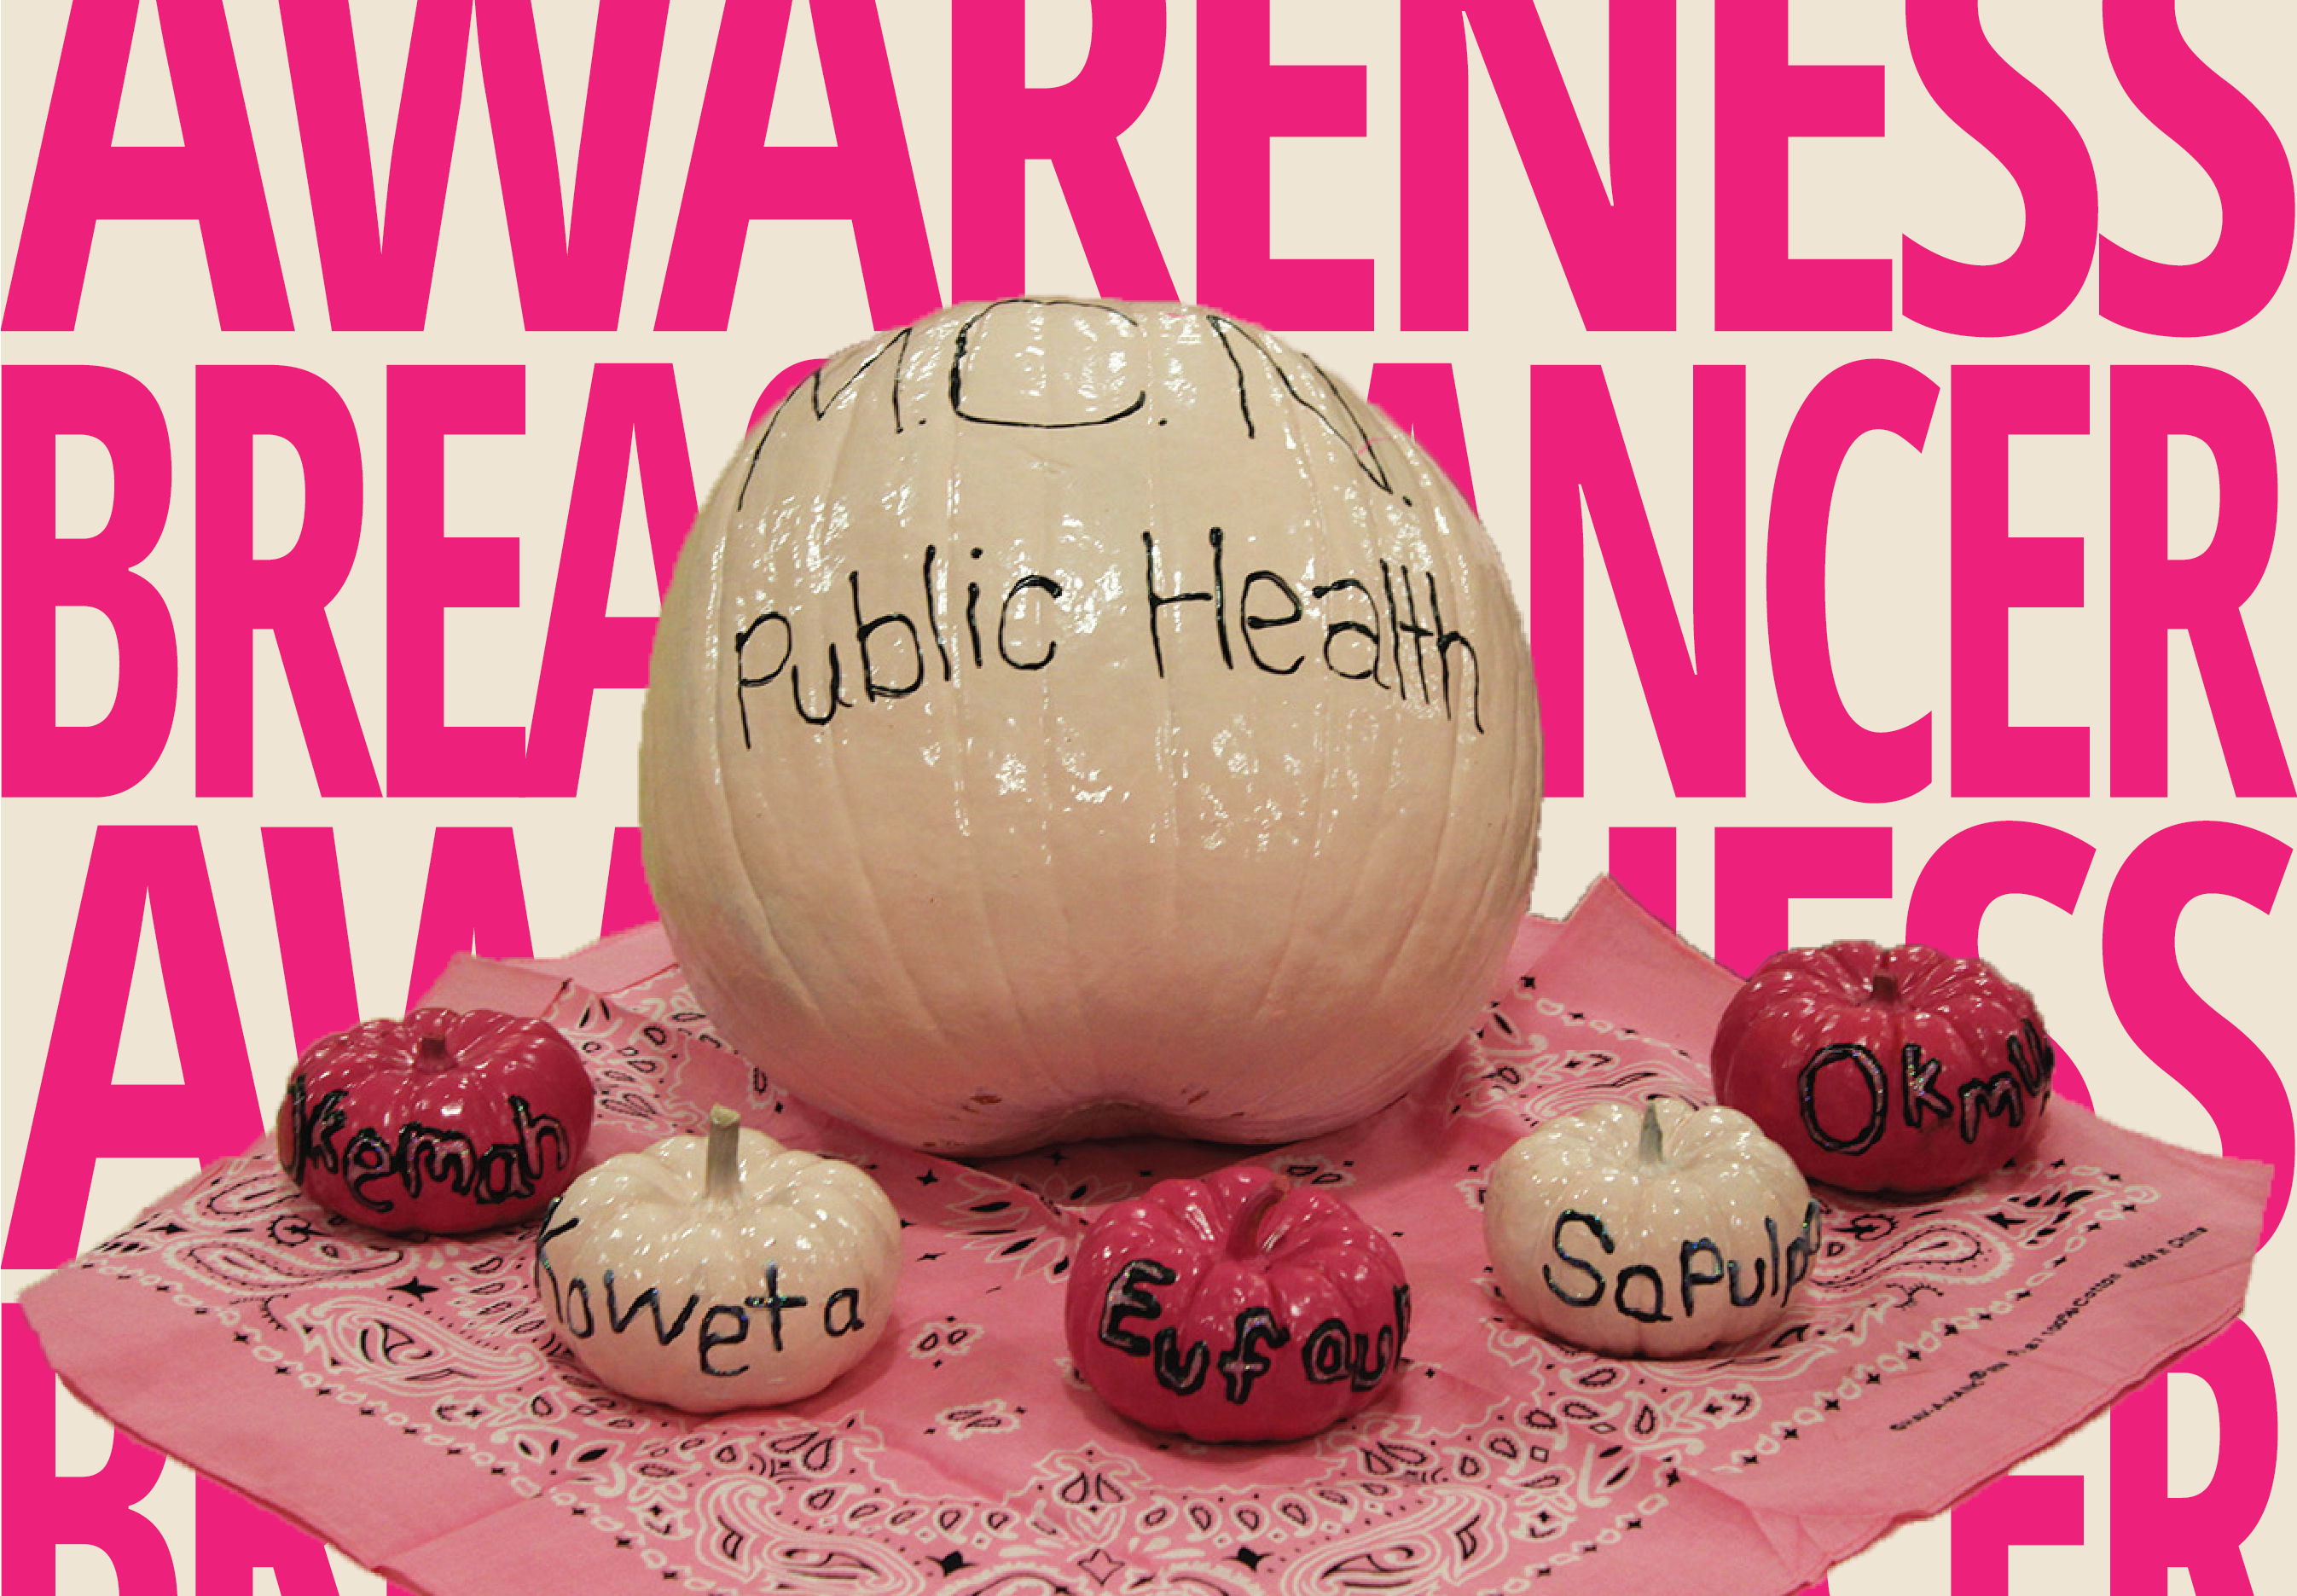 Embrace Pink: October is Breast Cancer Awareness Month - Comanche